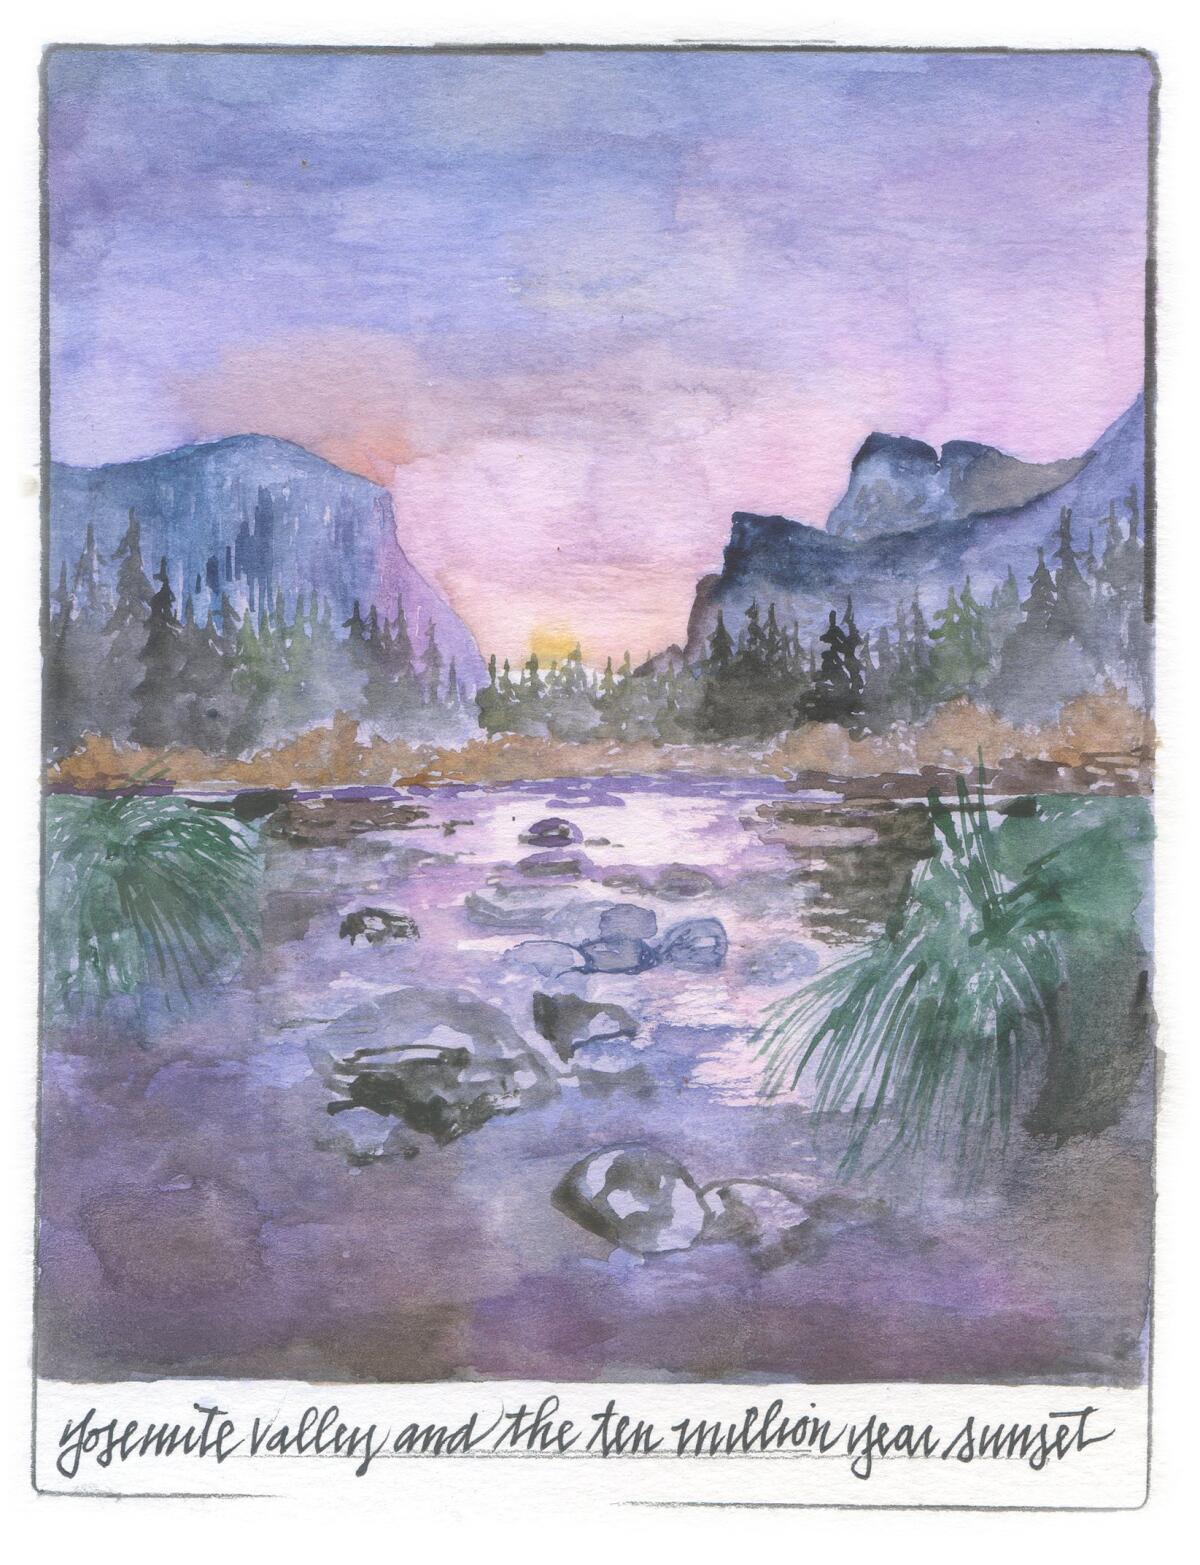 An illustration of Yosemite Valley at sunset from Obi Kaufmann's "The Forests of California."